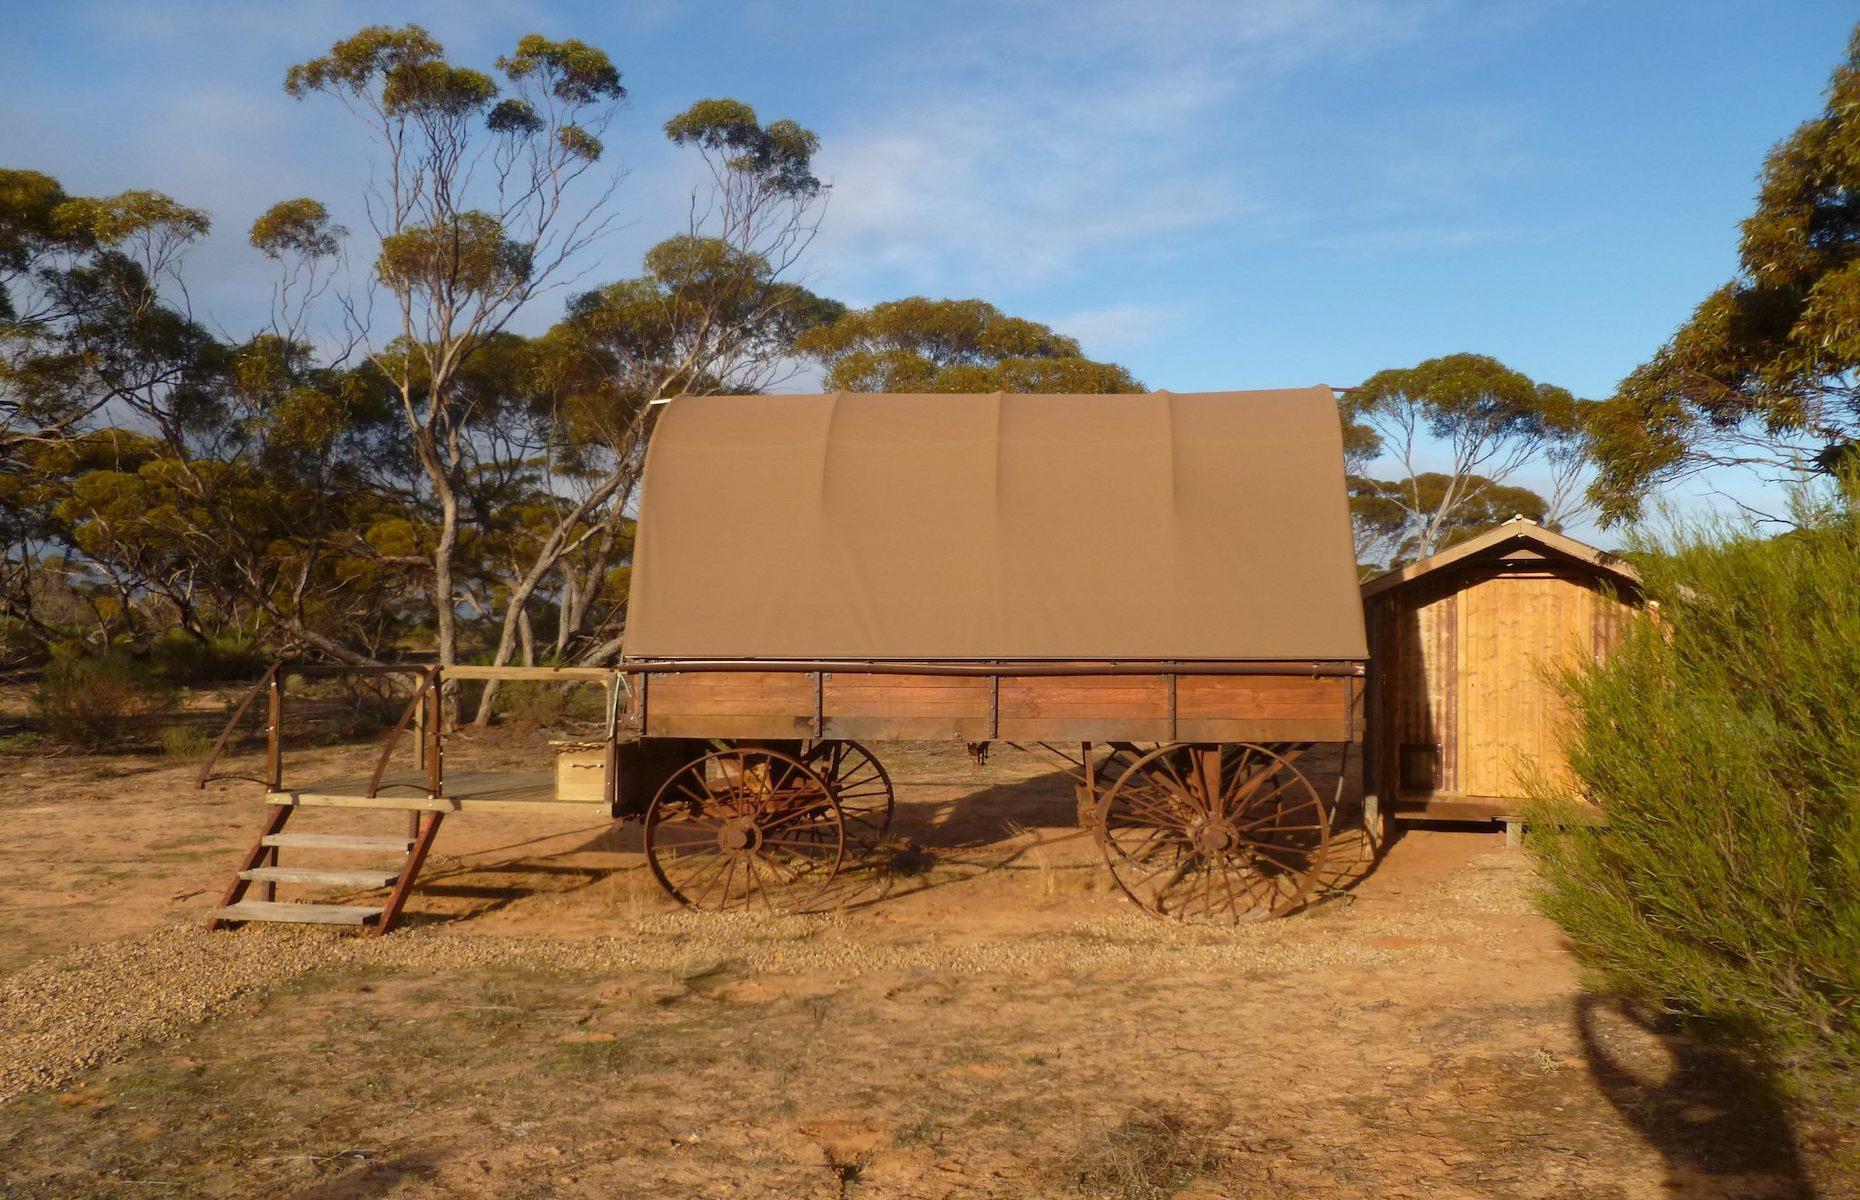 <p>For a real outback camping adventure, it's possible to snooze beneath the star-speckled South Australia sky and drift off to a lullaby of bush sounds with a night in a <a href="https://gawlerrangessafaris.com/how-to-get-here/kangaluna-camp/">Swagon</a>. The renovated covered wagon comes with a swag bed and glorious sky views, which is why it's also known as the “galaxy suite”. Elsewhere in Kangaluna Camp, a wilderness retreat located in the Mallee region of the Gawler Ranges on the Eyre Peninsula, are safari tents with handmade wooden beds and private bathrooms. </p>